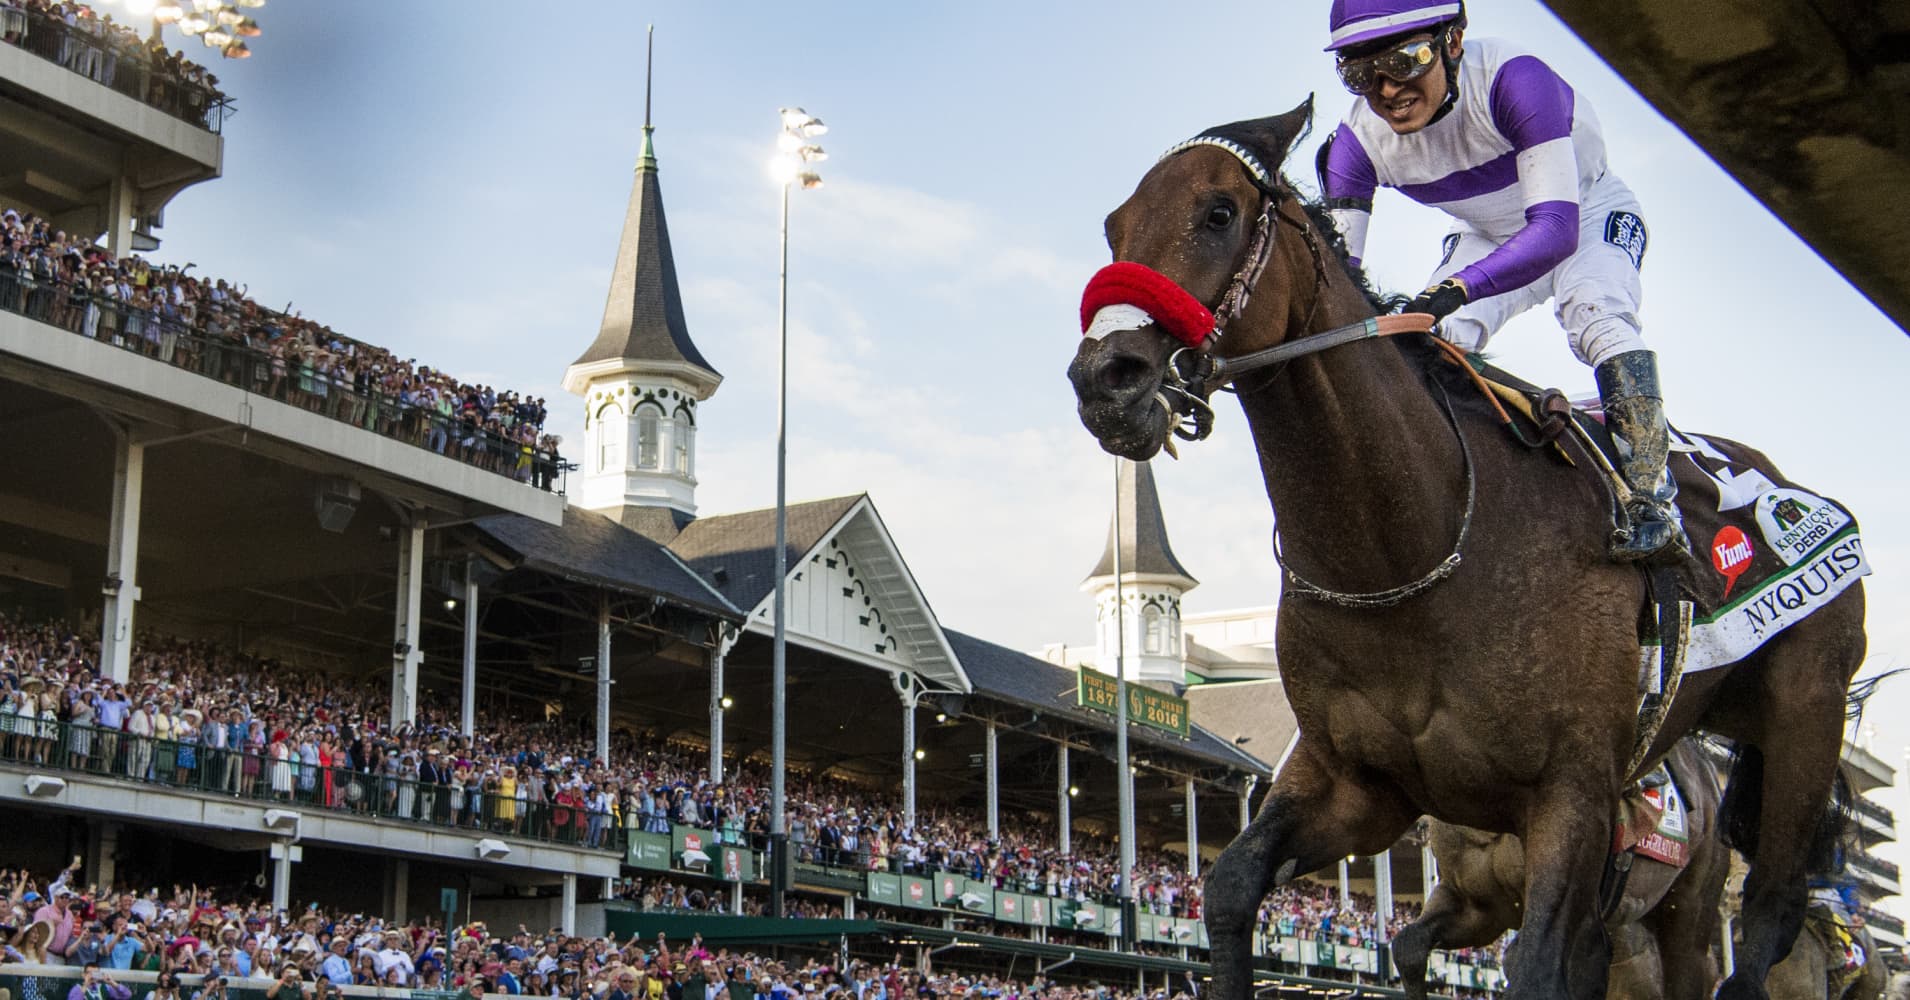 A ticket to the Kentucky Derby could cost you $15,000